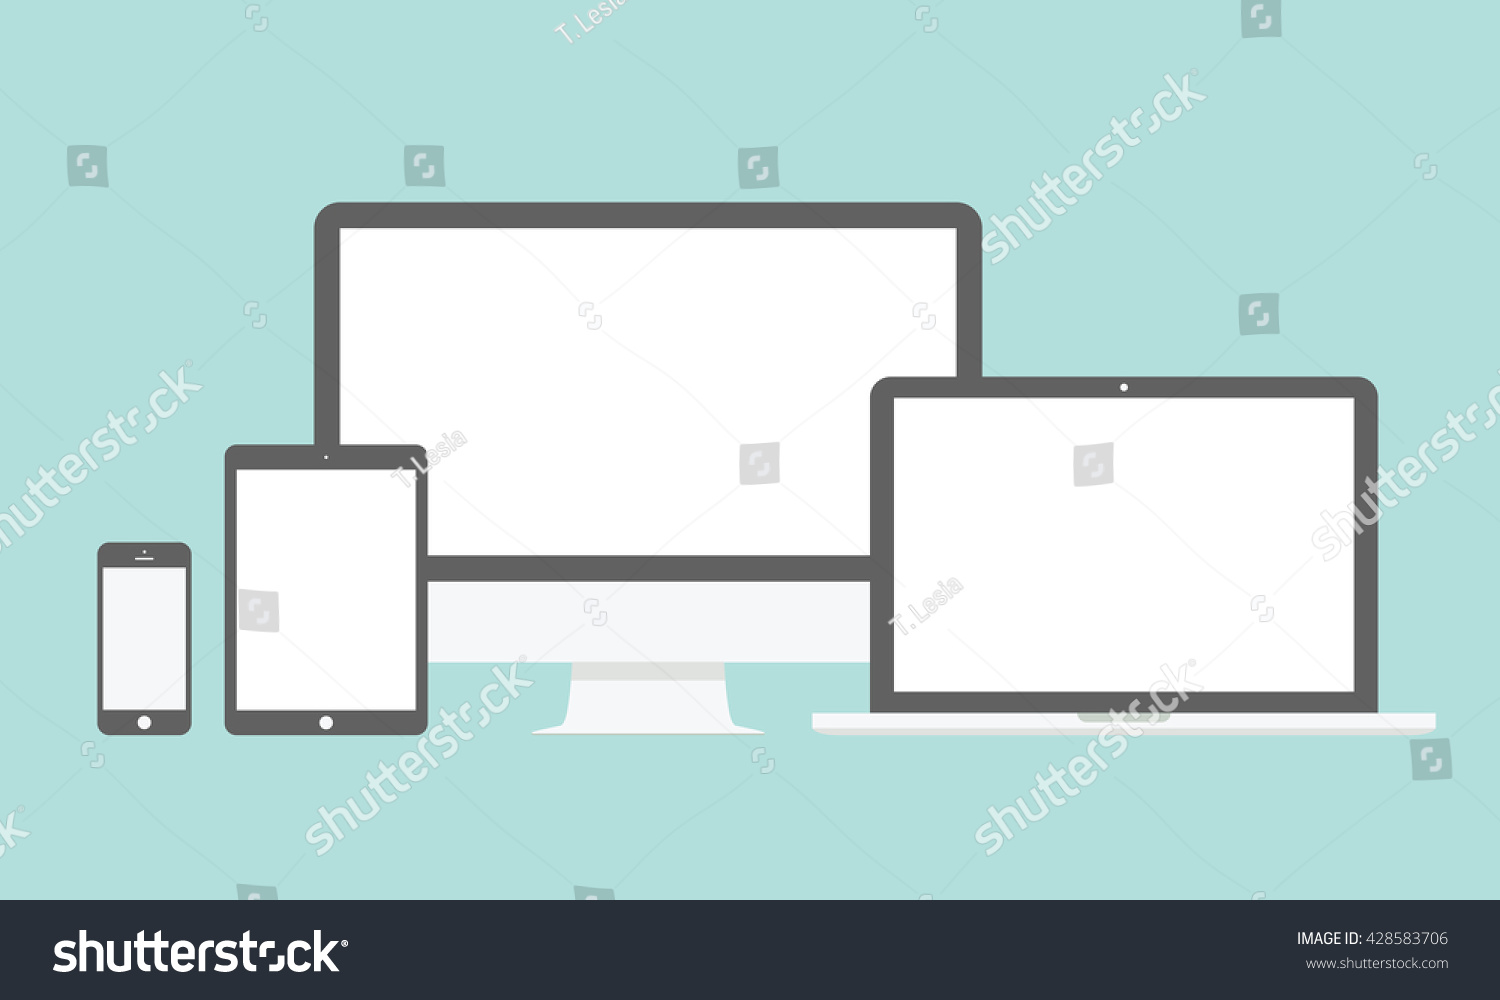 Device mockup template. Set of computer monitor, computer, laptop, phone, tablet isolated on green background. Flat vector illustration.